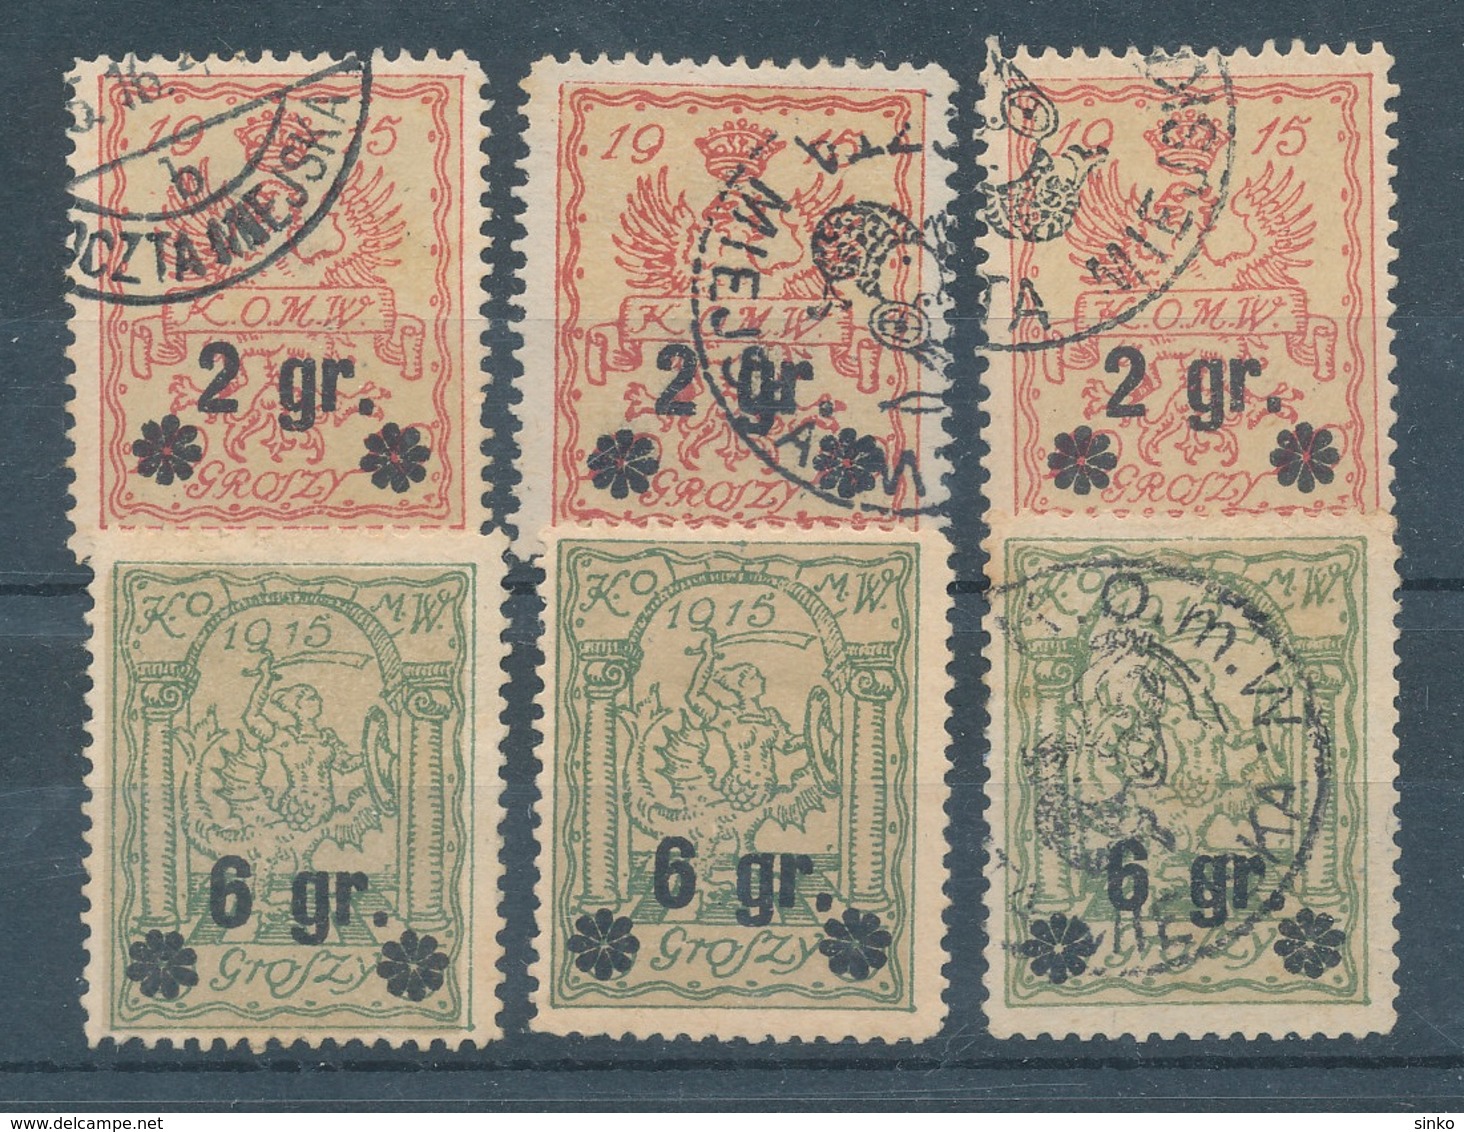 1916. Poland (Warsaw City Post) - Used Stamps